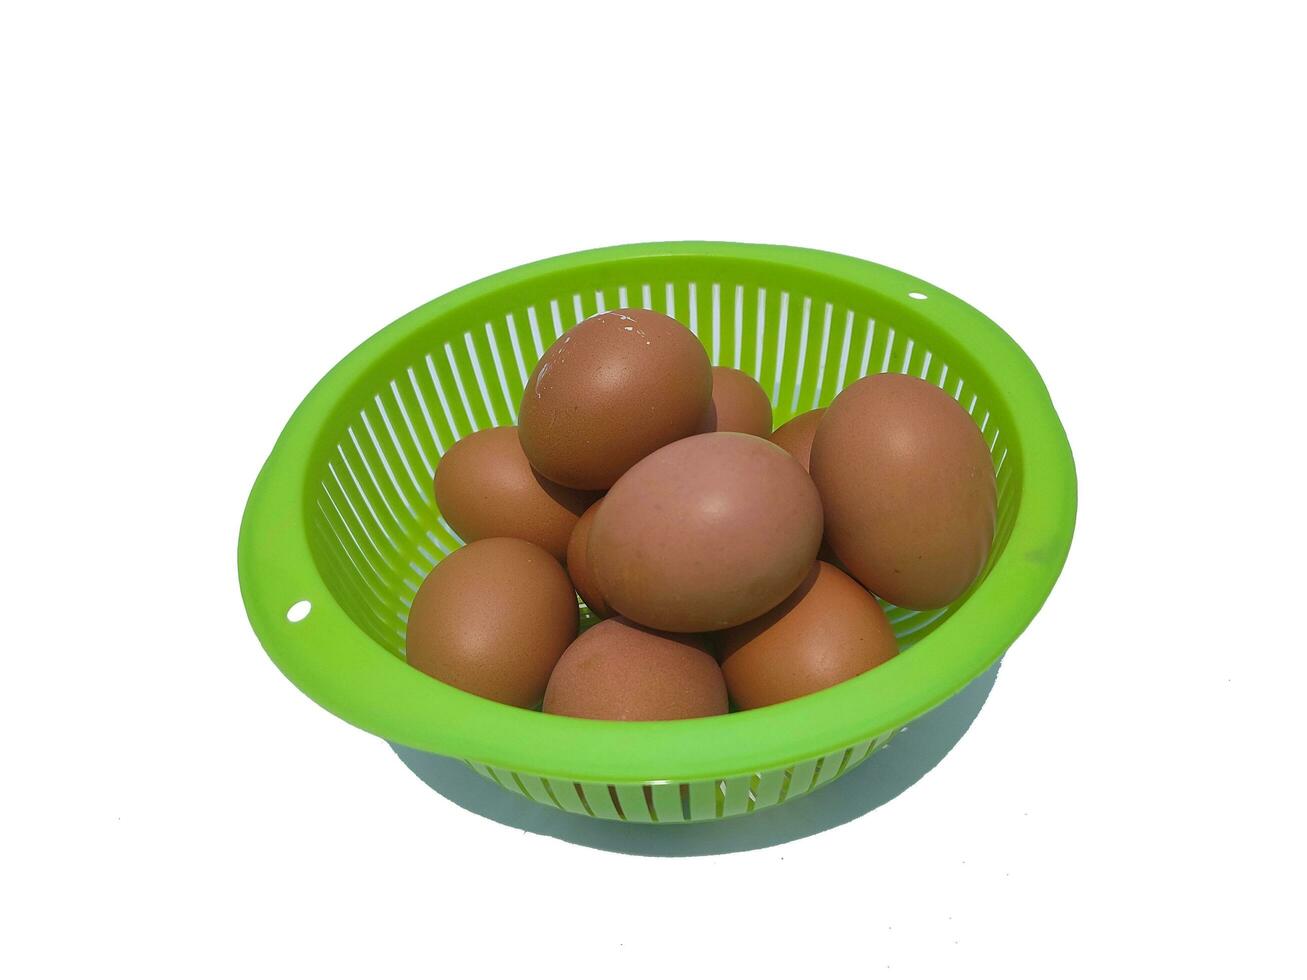 A group of eggs in green basket isolated on white background photo